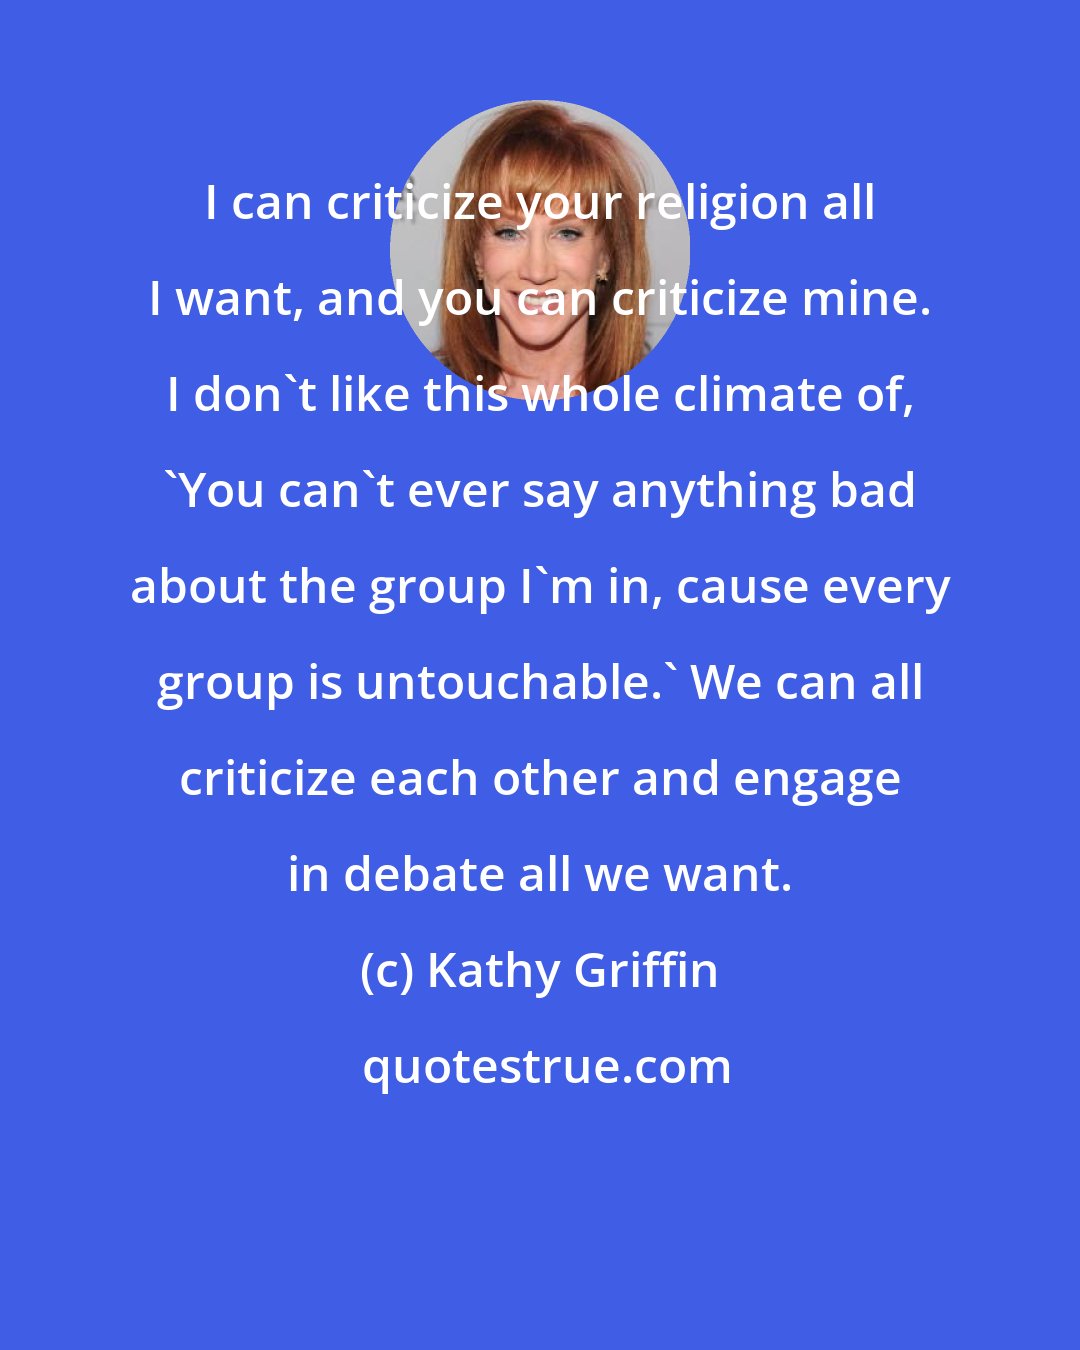 Kathy Griffin: I can criticize your religion all I want, and you can criticize mine. I don't like this whole climate of, 'You can't ever say anything bad about the group I'm in, cause every group is untouchable.' We can all criticize each other and engage in debate all we want.